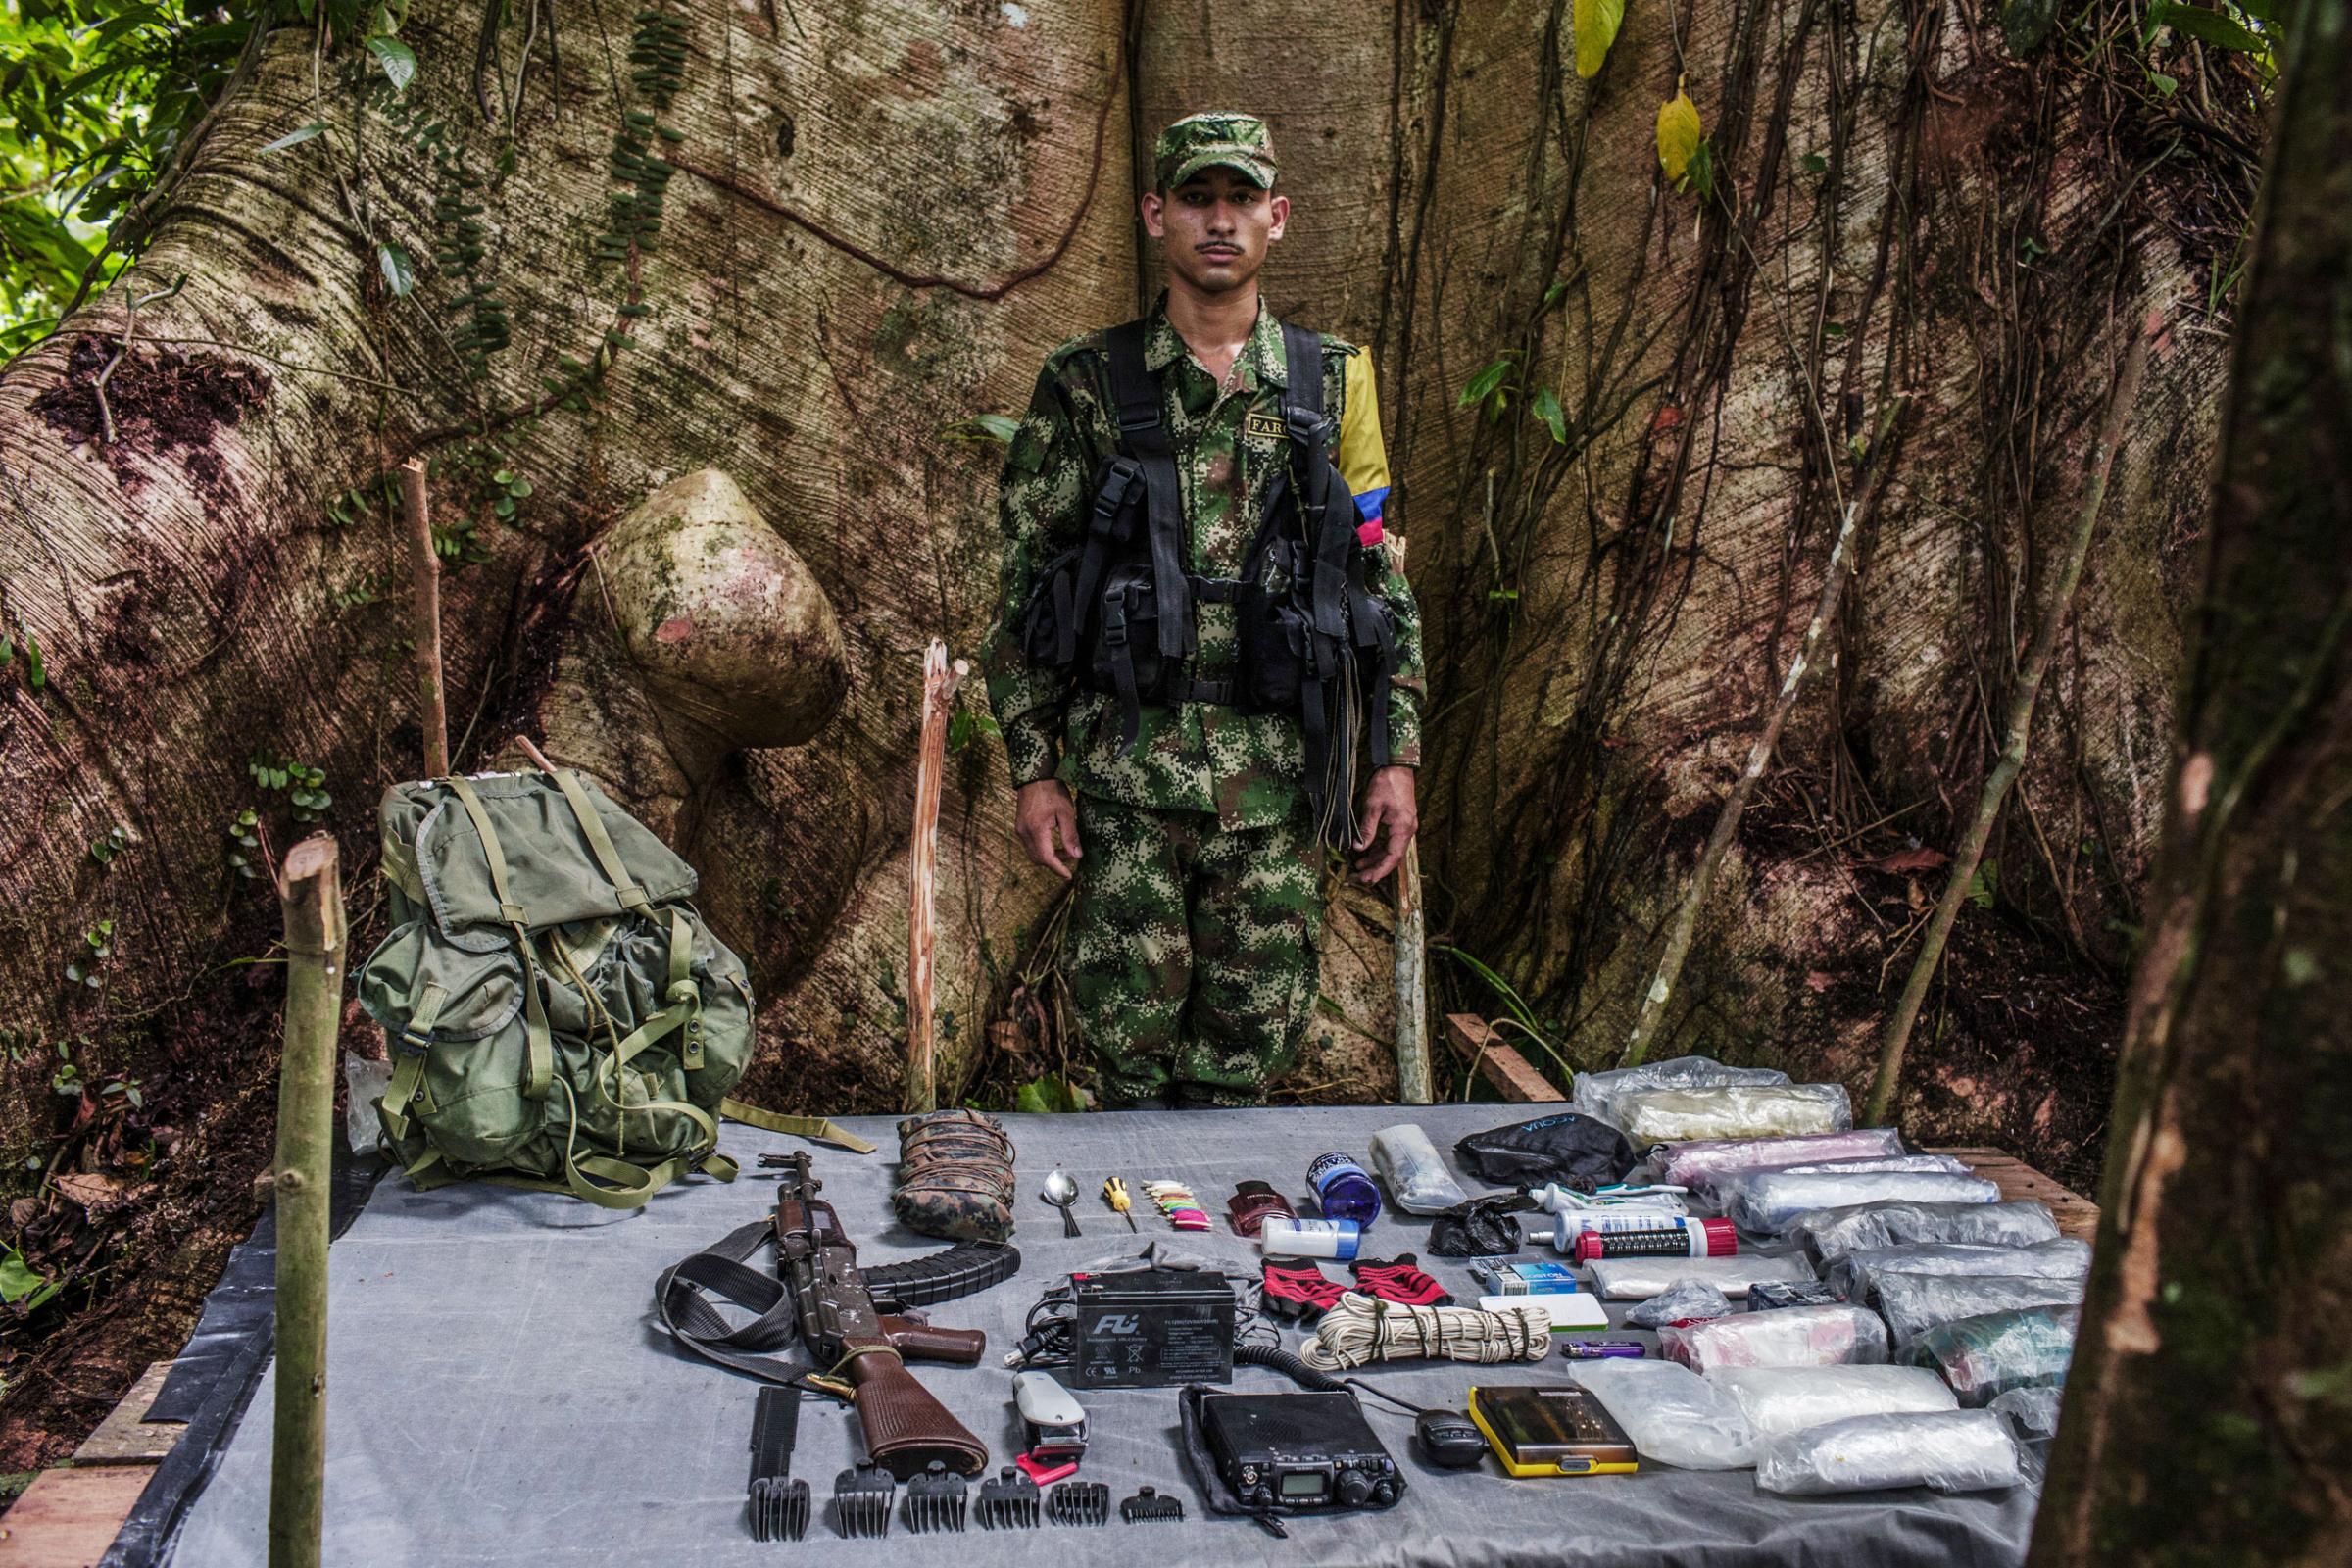 "Carlos," 19-years old is a radio operator and electrician with FARC. The radio requires a four pound battery which he carries, along with tools to repair machinery.